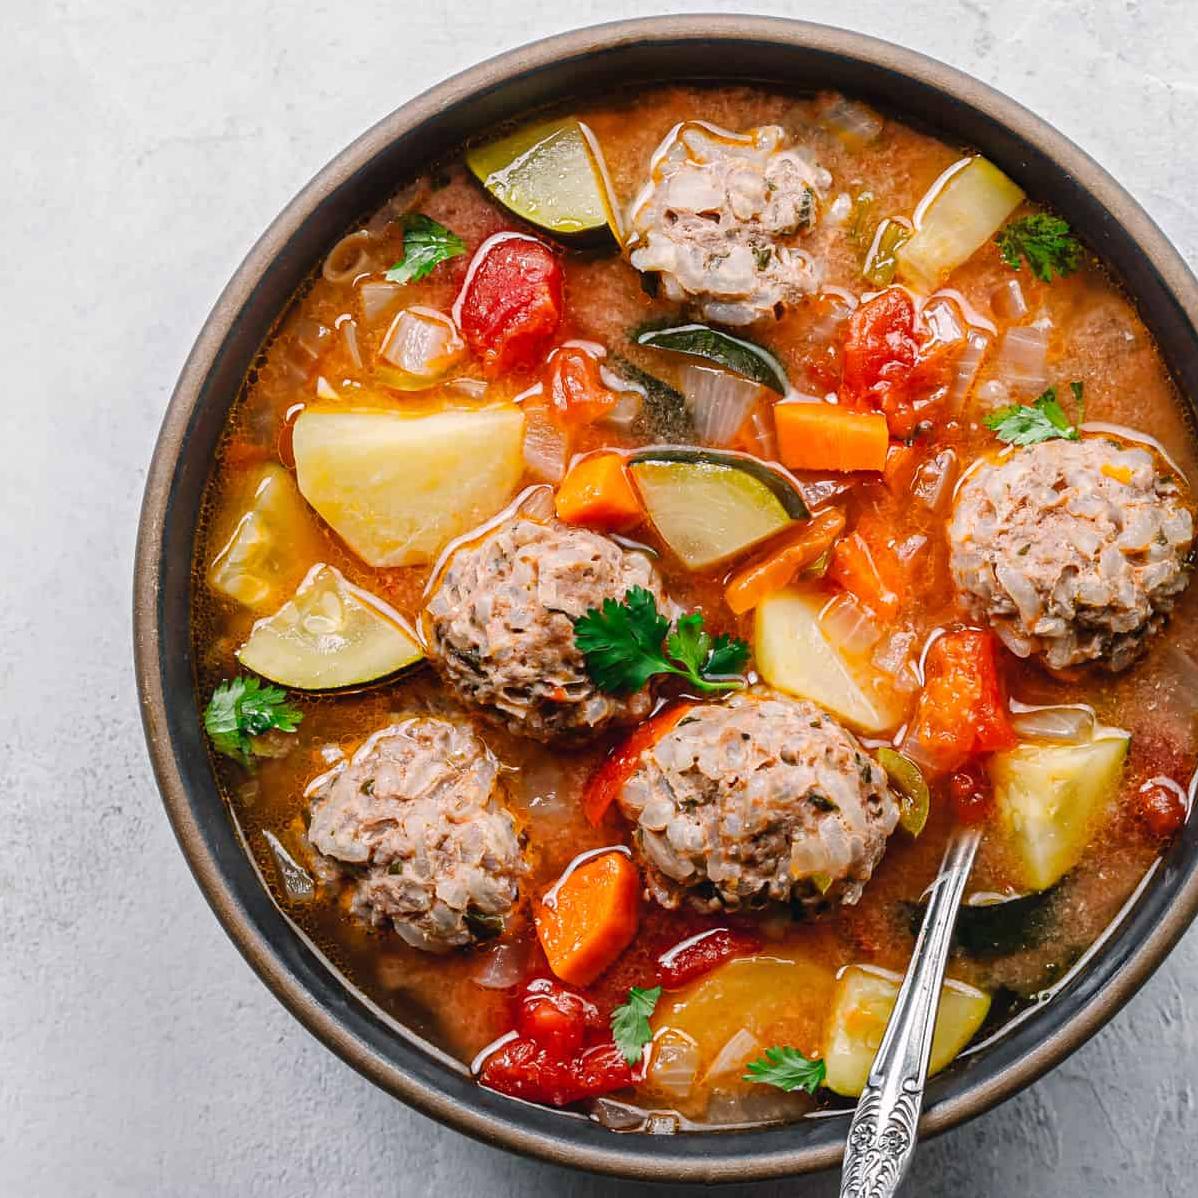 Authentic Sopa de Albondigas: A Hearty Bowl of Happiness